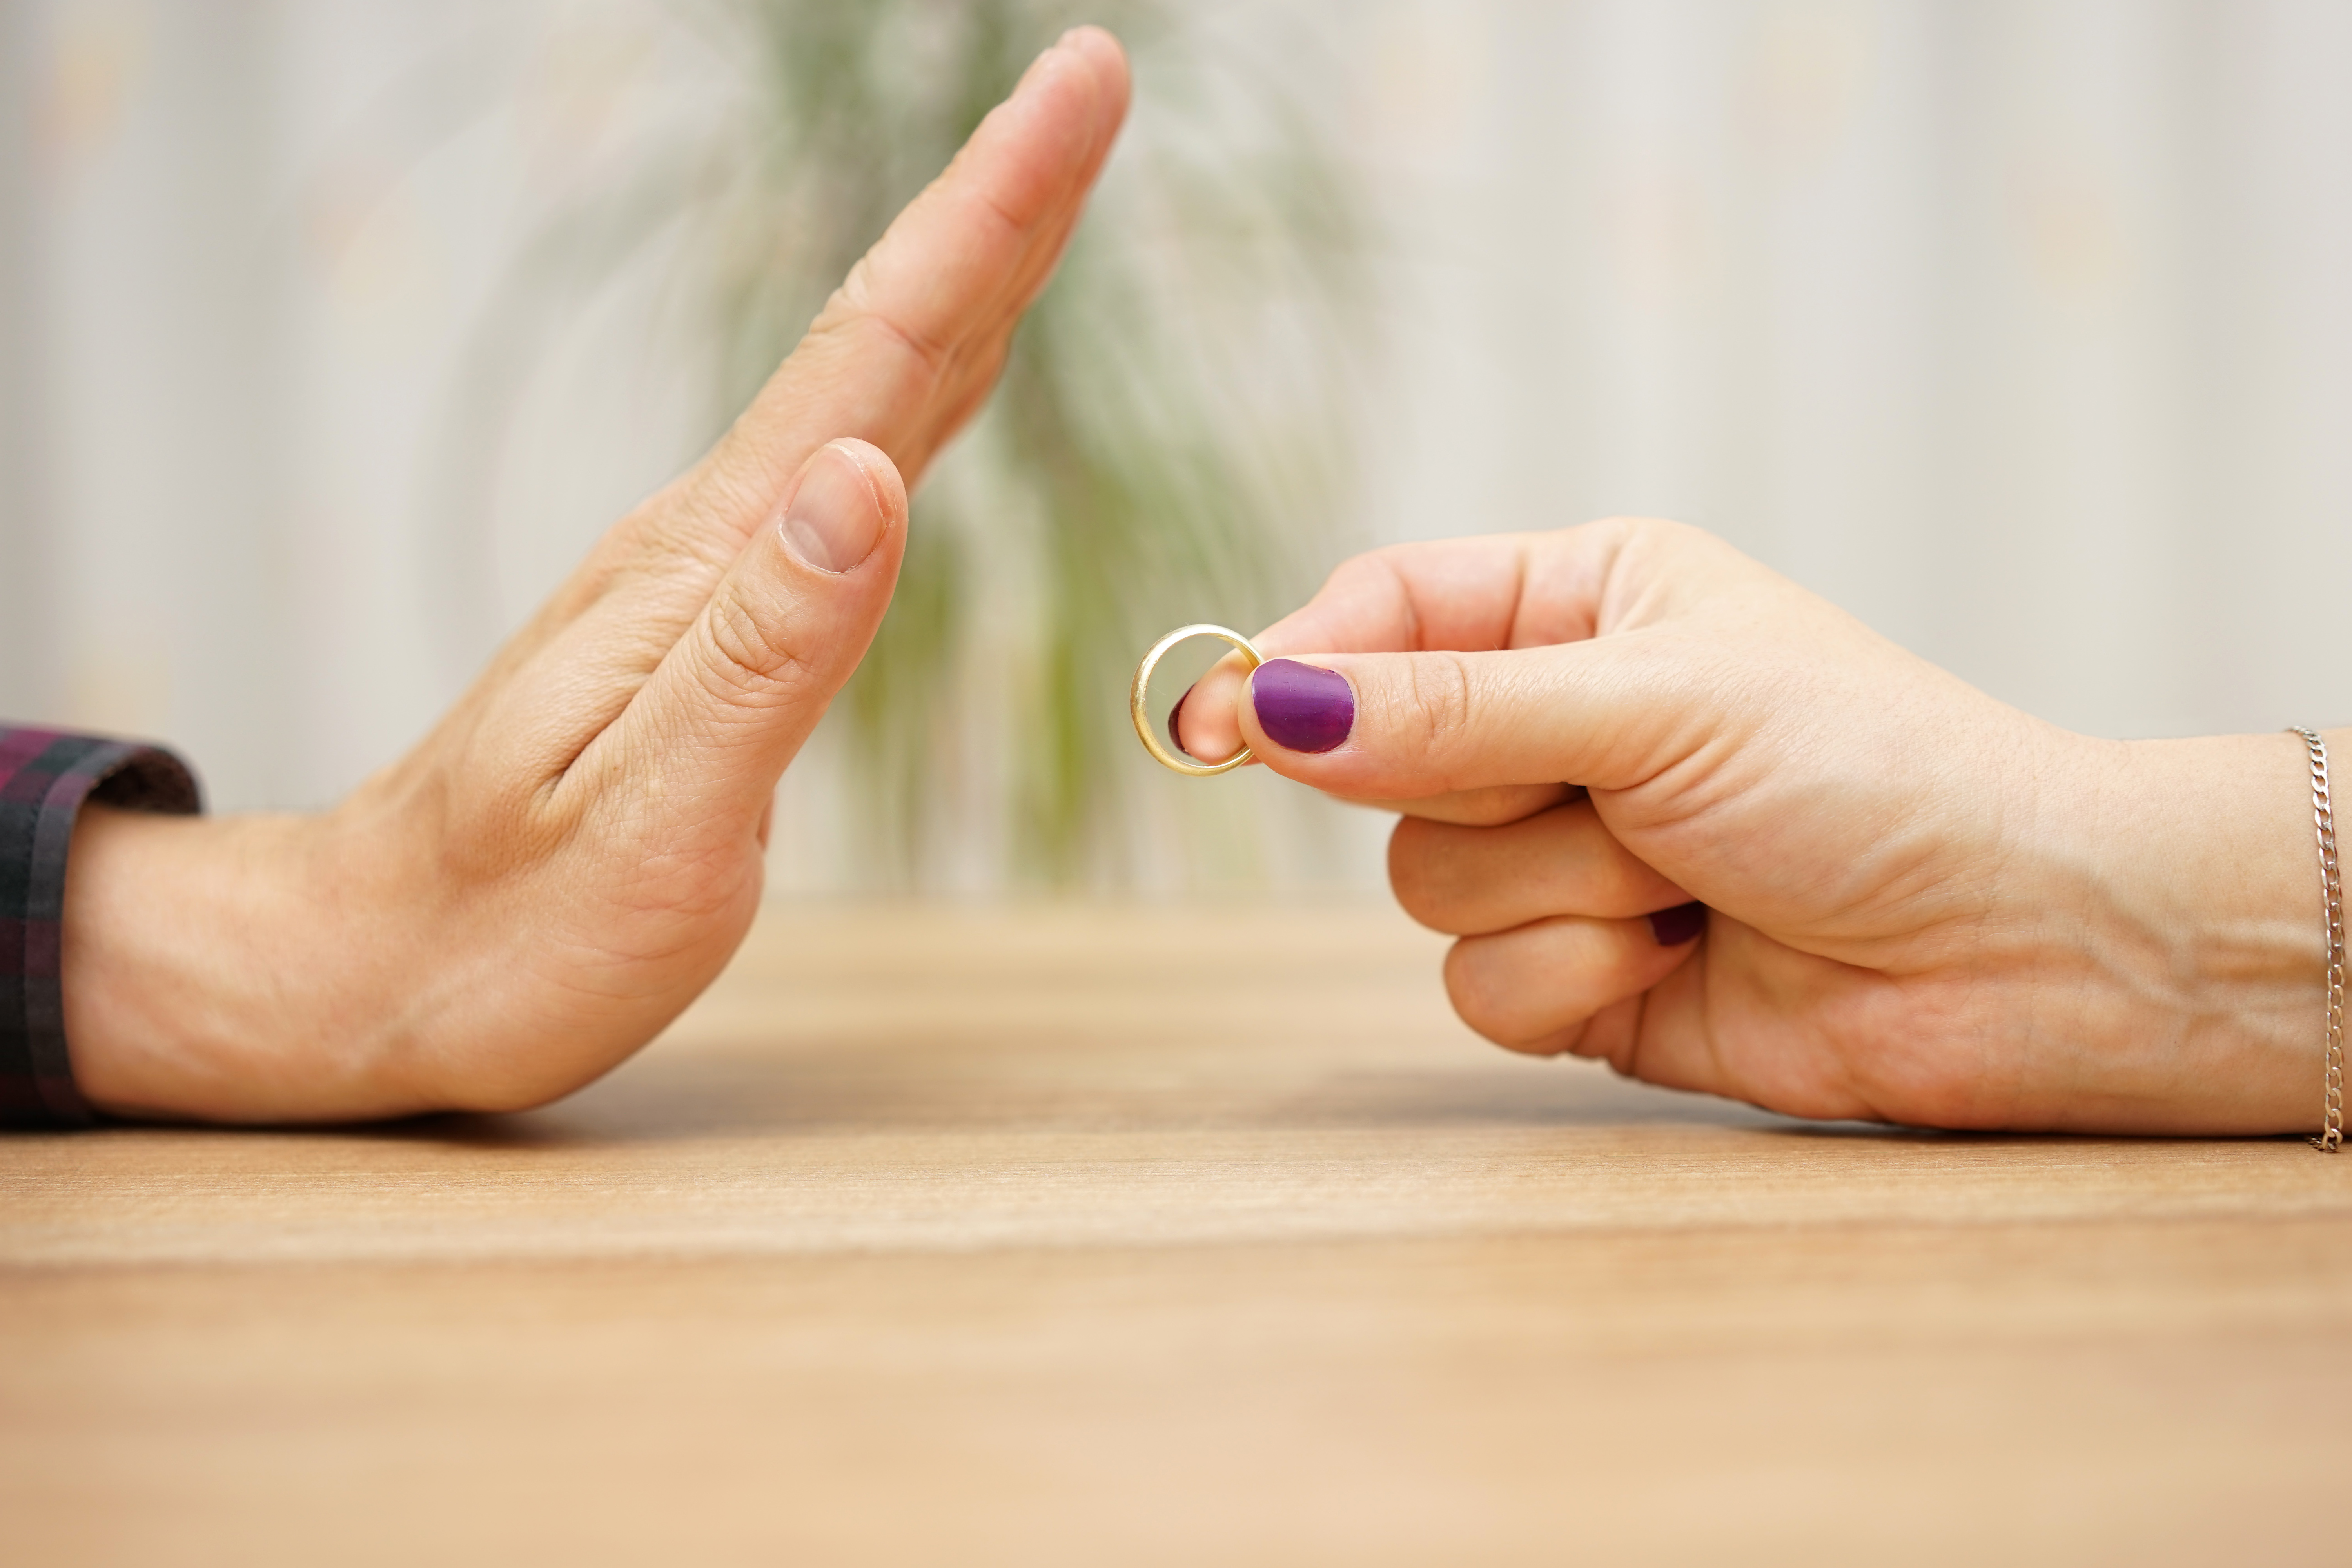 A man refusing a ring a woman is trying to give him | Source: Shutterstock